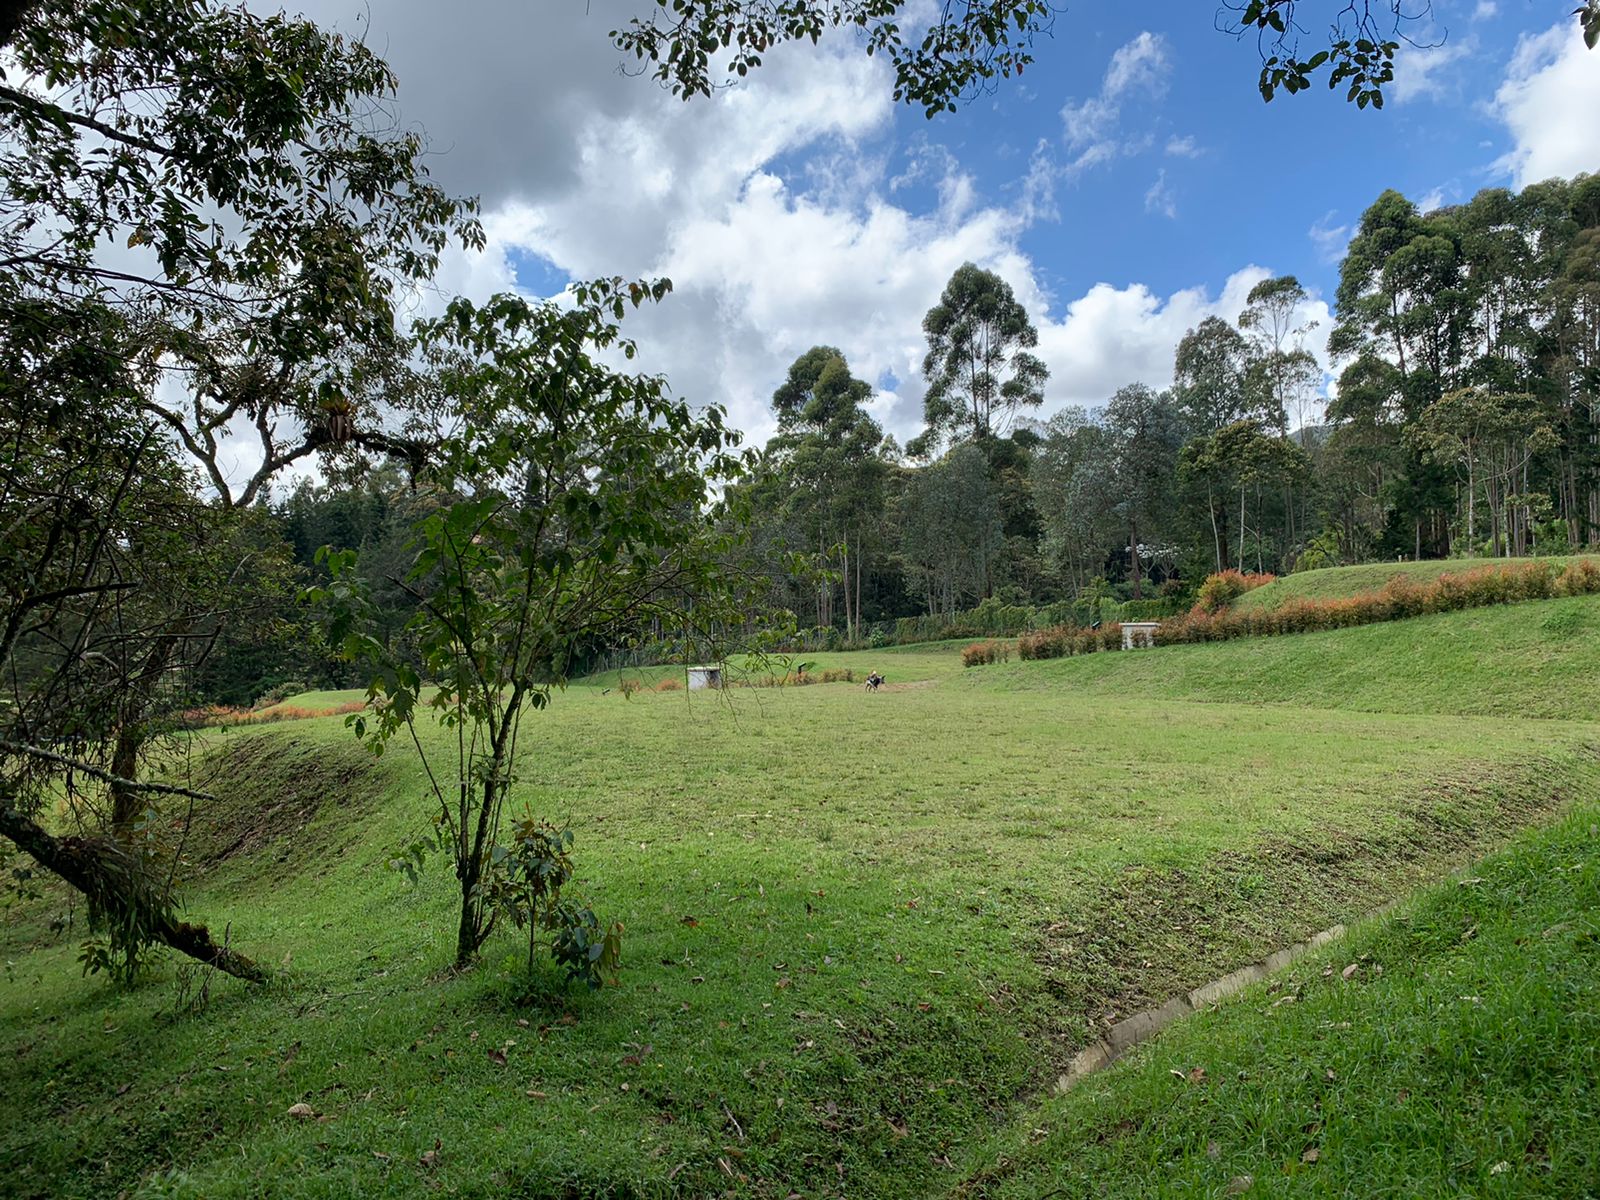 Flat, Buildable Lot in Popular El Retiro Area 35 Minutes From Medellin In Gated Community